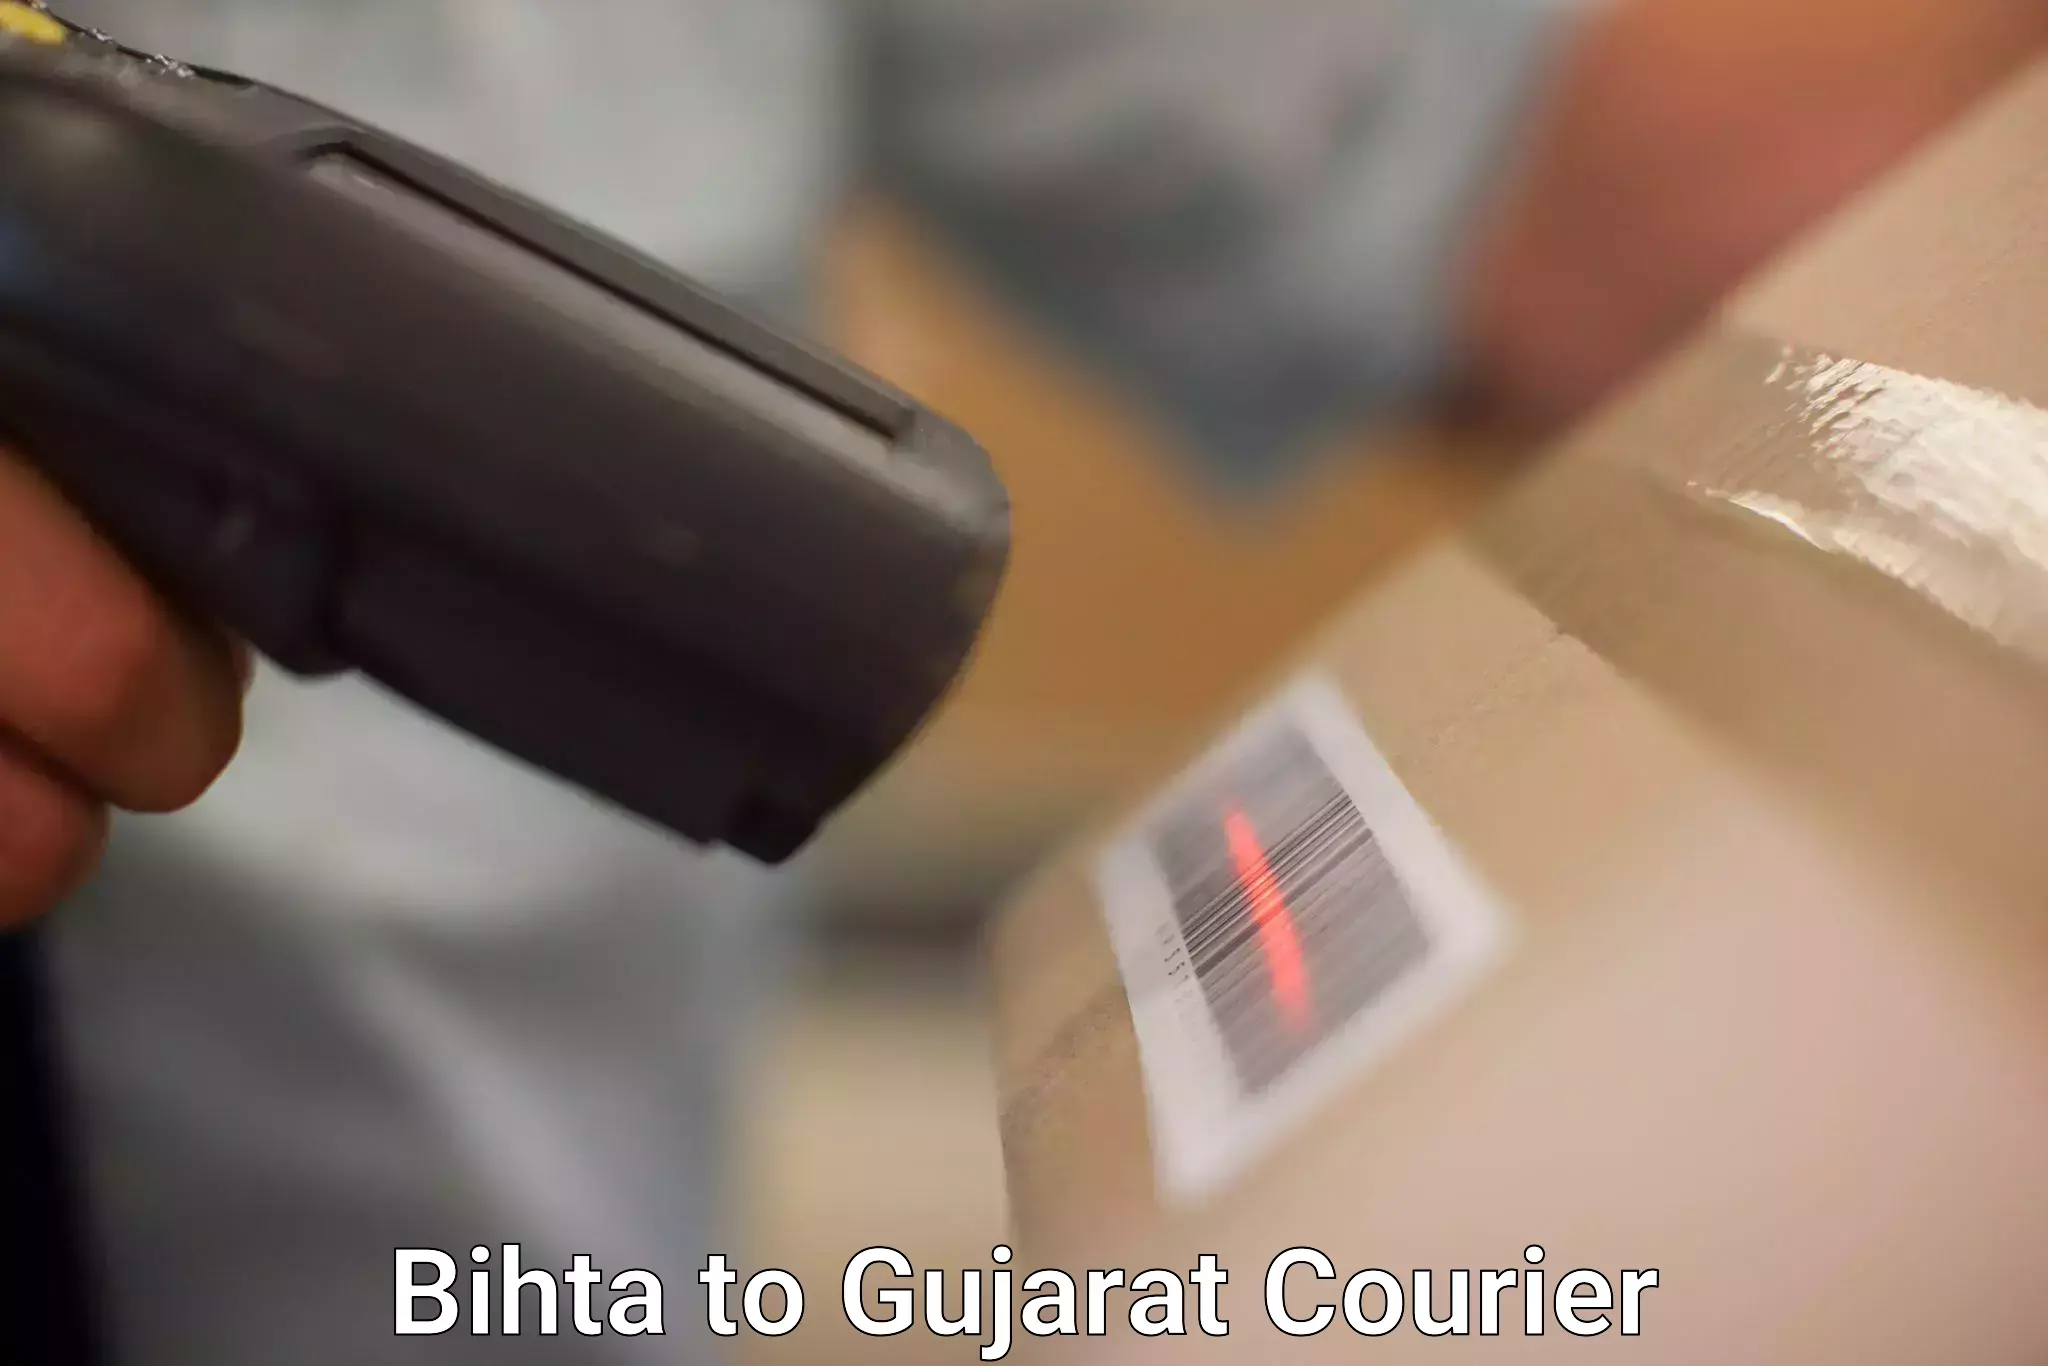 Quality courier services in Bihta to Bhuj